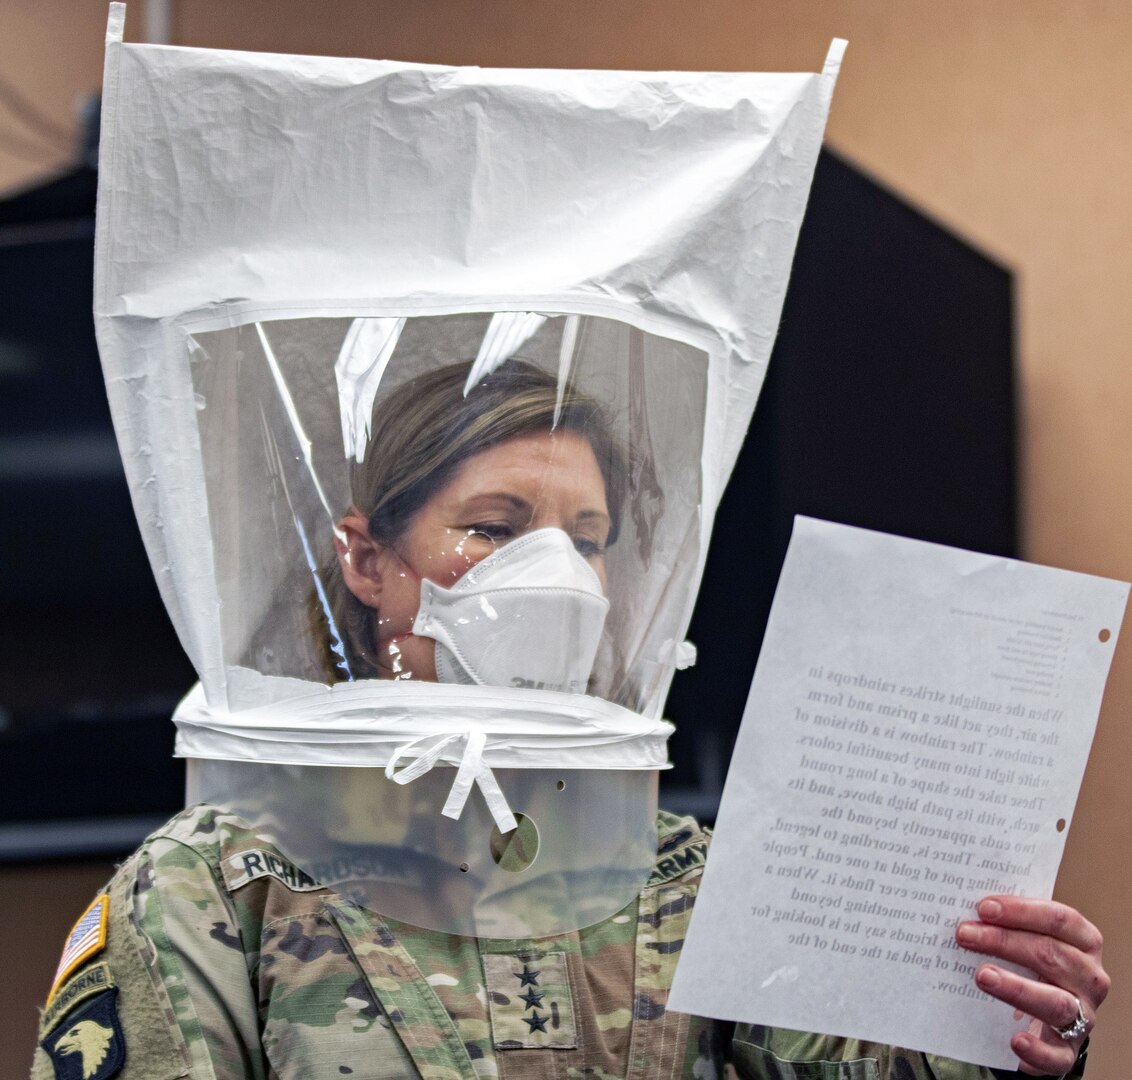 Lt. Gen. Laura Richardson, commander of U.S. Army North, goes through the safety precautions before entering the patient ward of the Edison Field Medical Site in Edison, N.J., April 13, 2020.